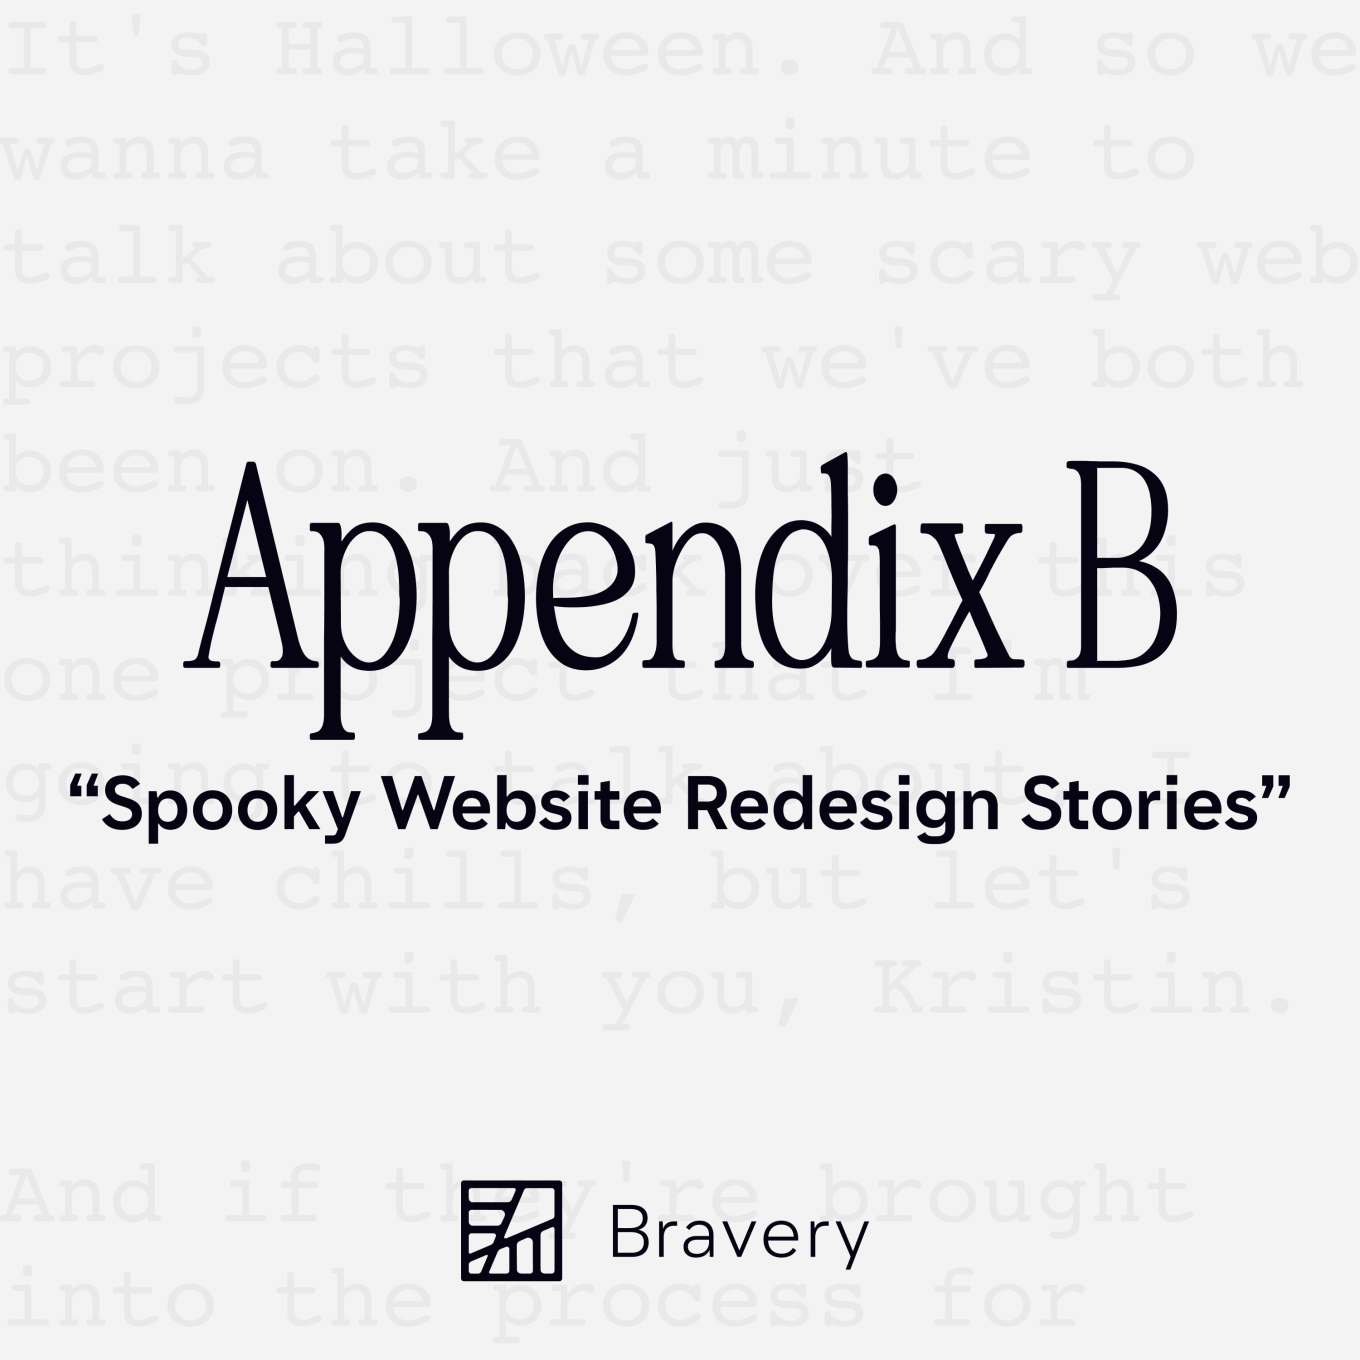 Appendix B Episode 37, text is present that reads, "Spooky Website Redesign Stories."